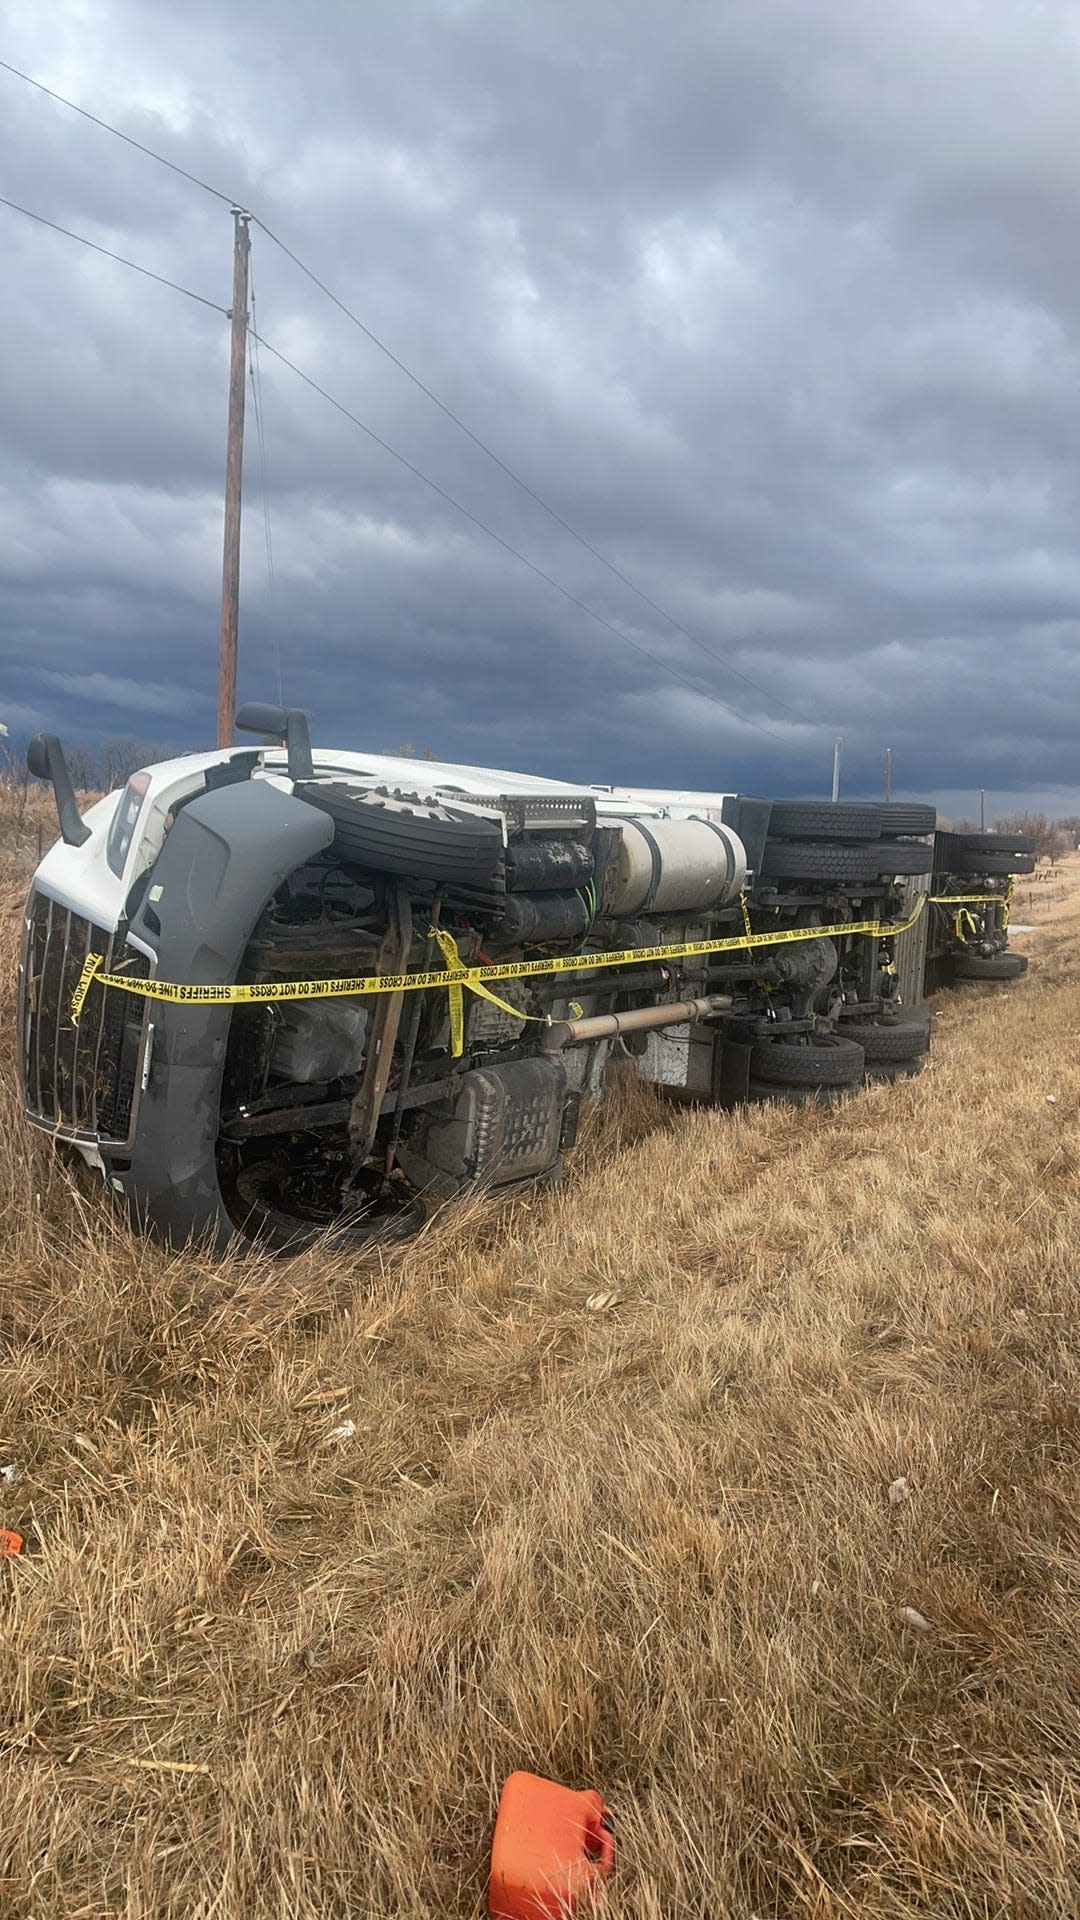 A semi-tractor trailer and passenger vehicle were blown off Interstate 80 near Williamsburg, Iowa, around 2 p.m. Jan. 16 after at least one tornado touched down, according to the Iowa County Sheriff's Office.